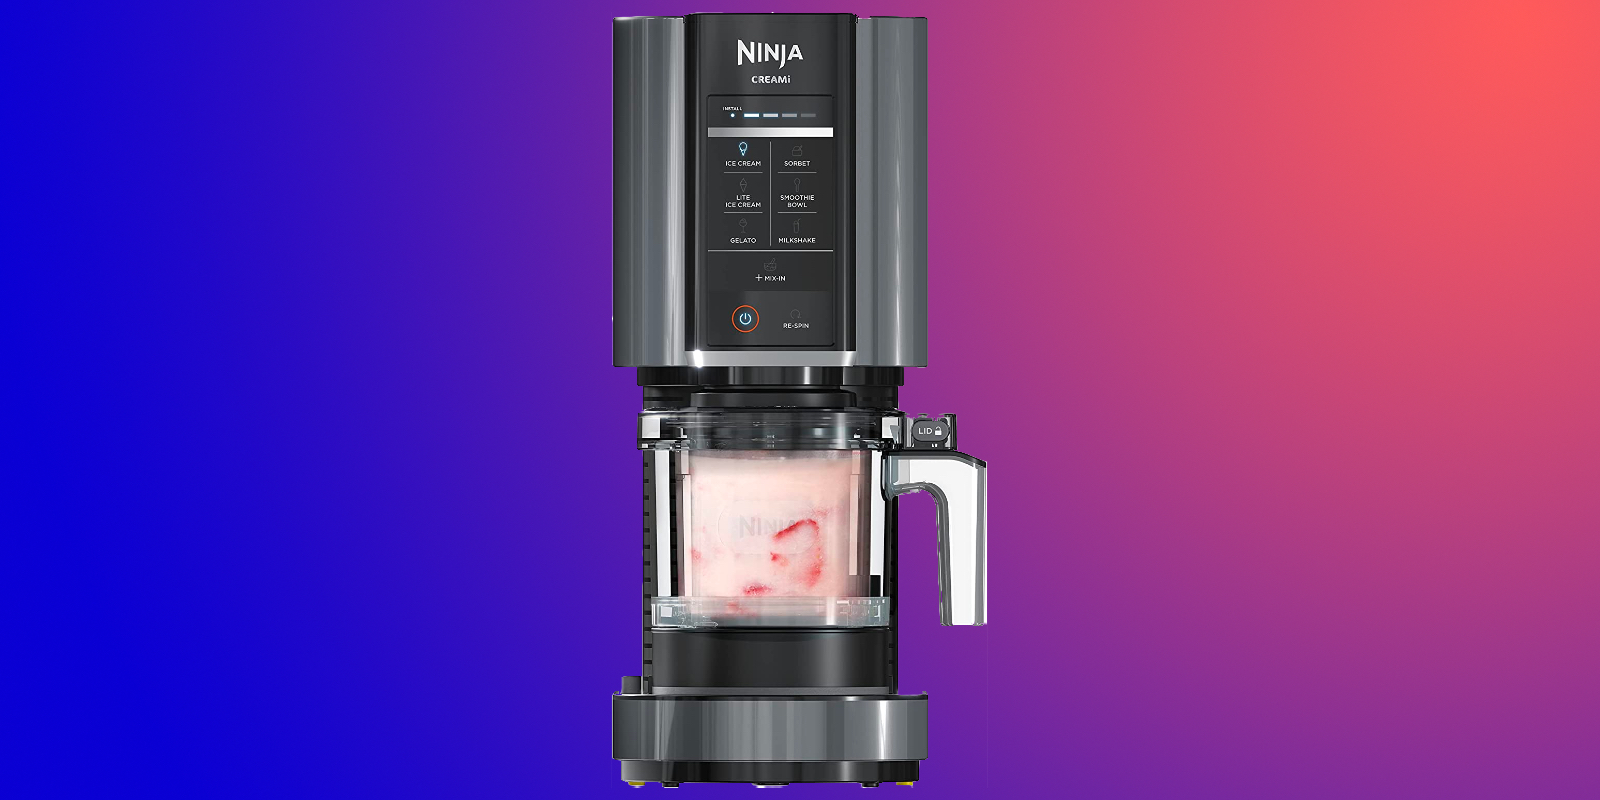 Ninja's CREAMi ice cream maker hits one of its best prices yet at